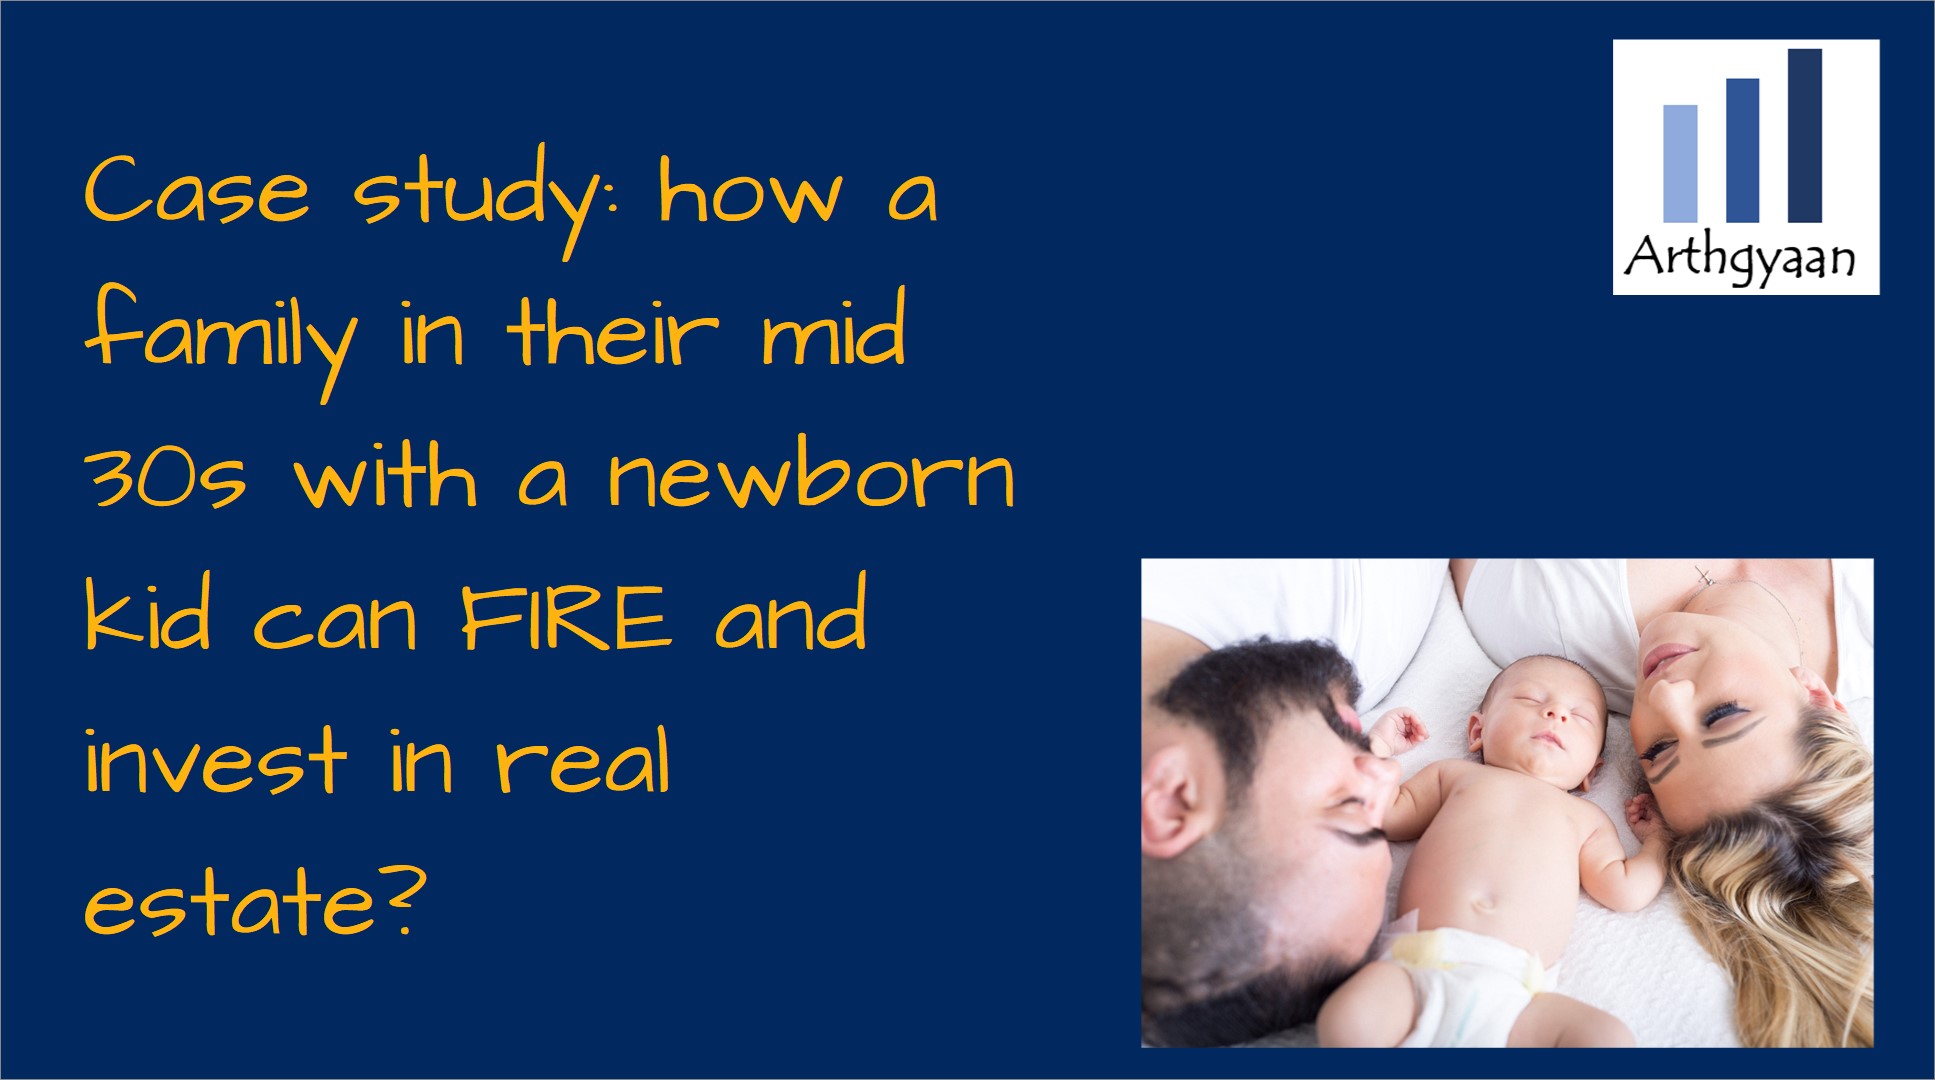 Case study: how a family in their mid-30s with a newborn kid can FIRE and invest in real estate?